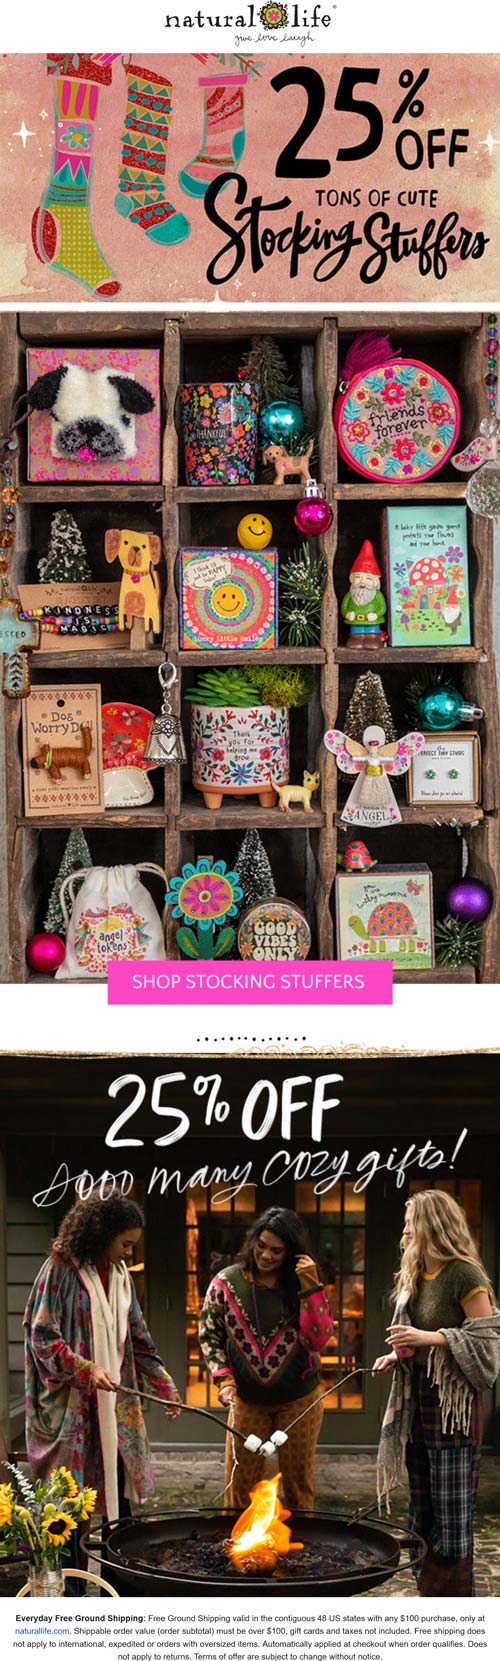 25% off stocking stuffers & cozy gifts at Natural Life #naturallife